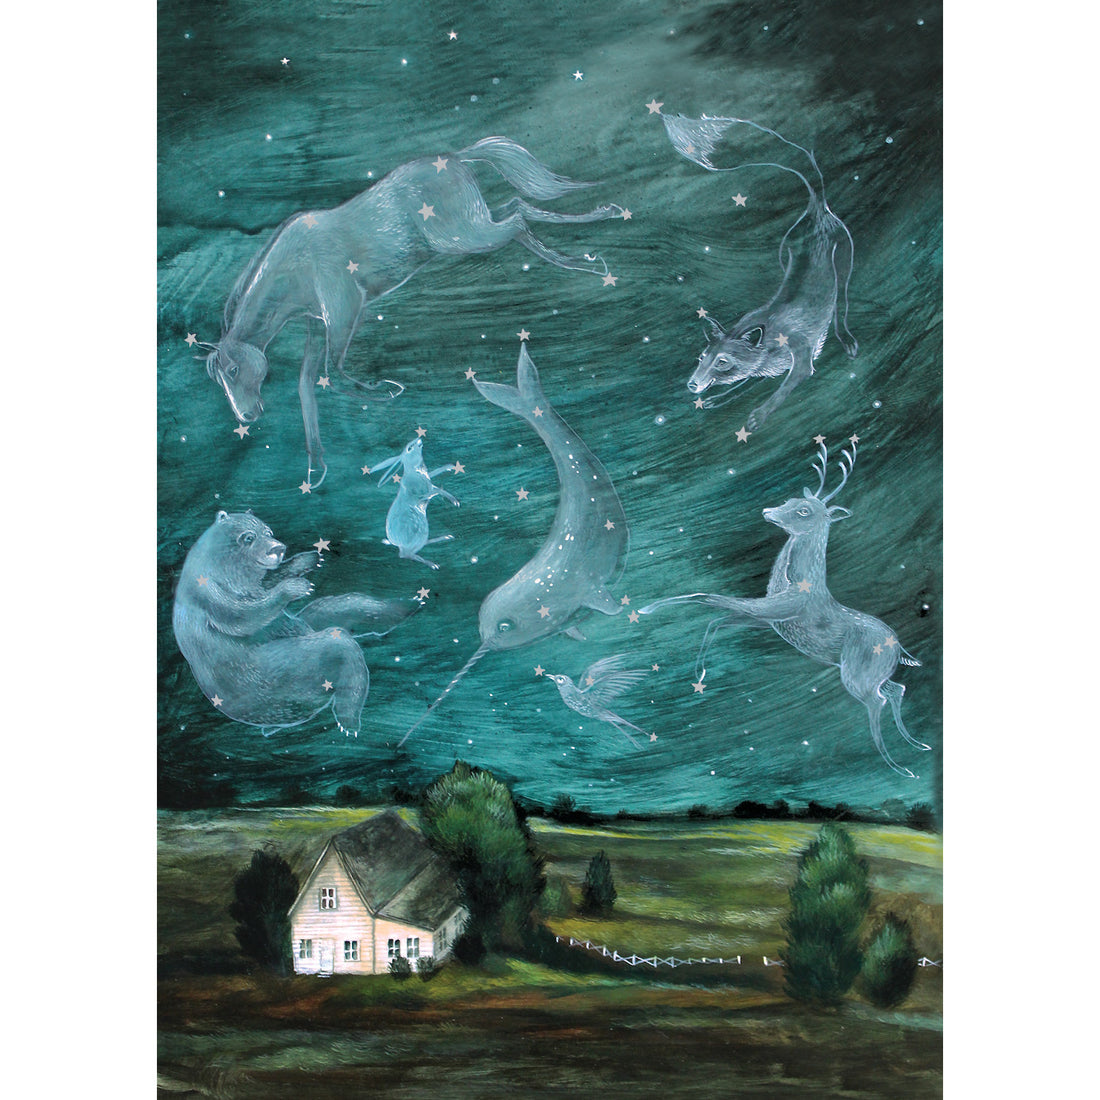 A whimsical illustration of the starry night sky sprawling over a farmhouse; faint outlines of animals fill the sky, including a horse, bear, fox, narwhale, rabbit, deer, and bird.